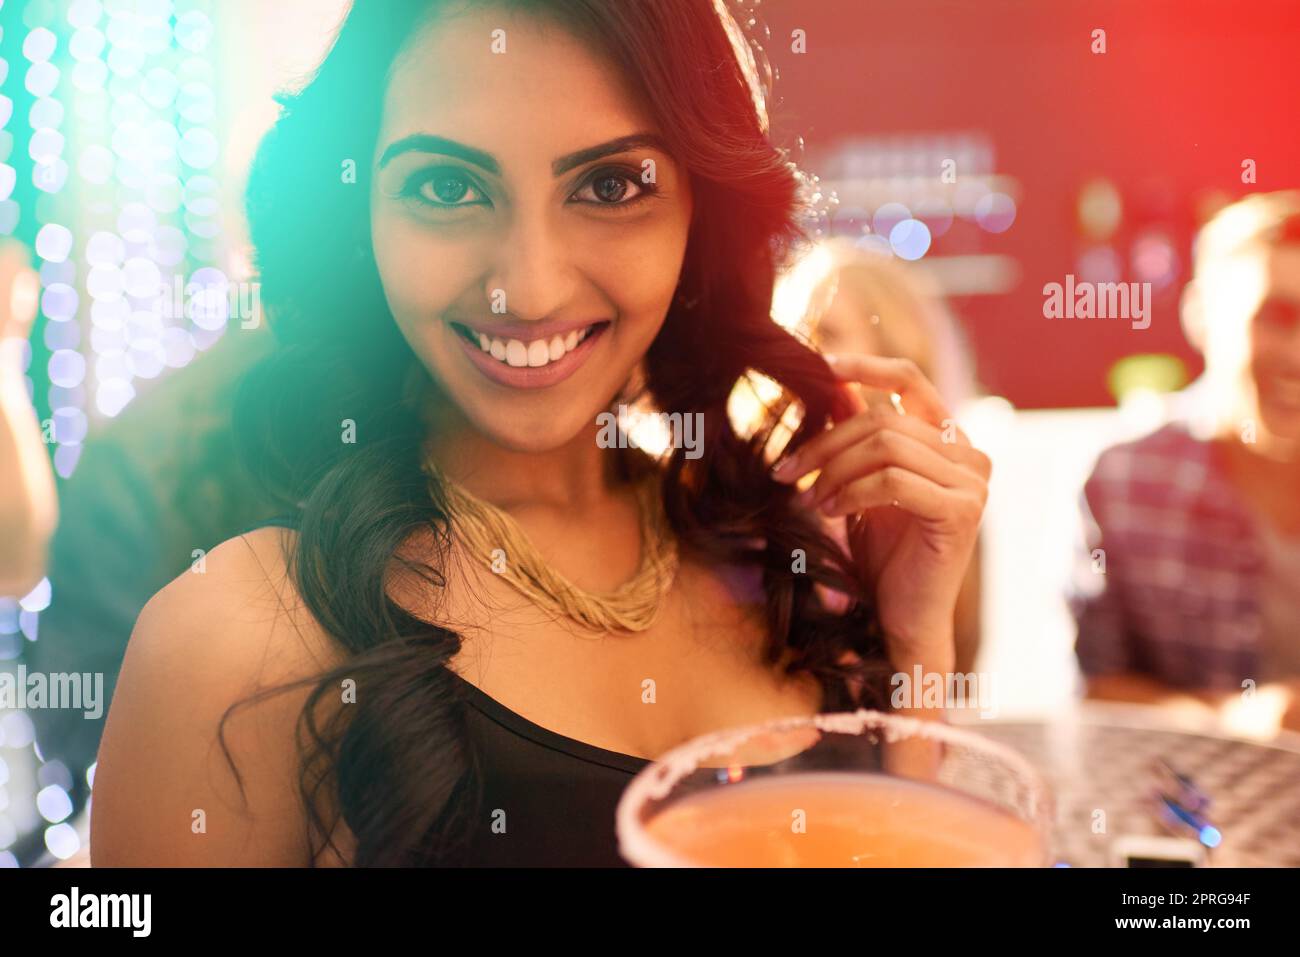 Tonight, we celebrate. Portrait of a young woman drinking a cocktail at a party. Stock Photo